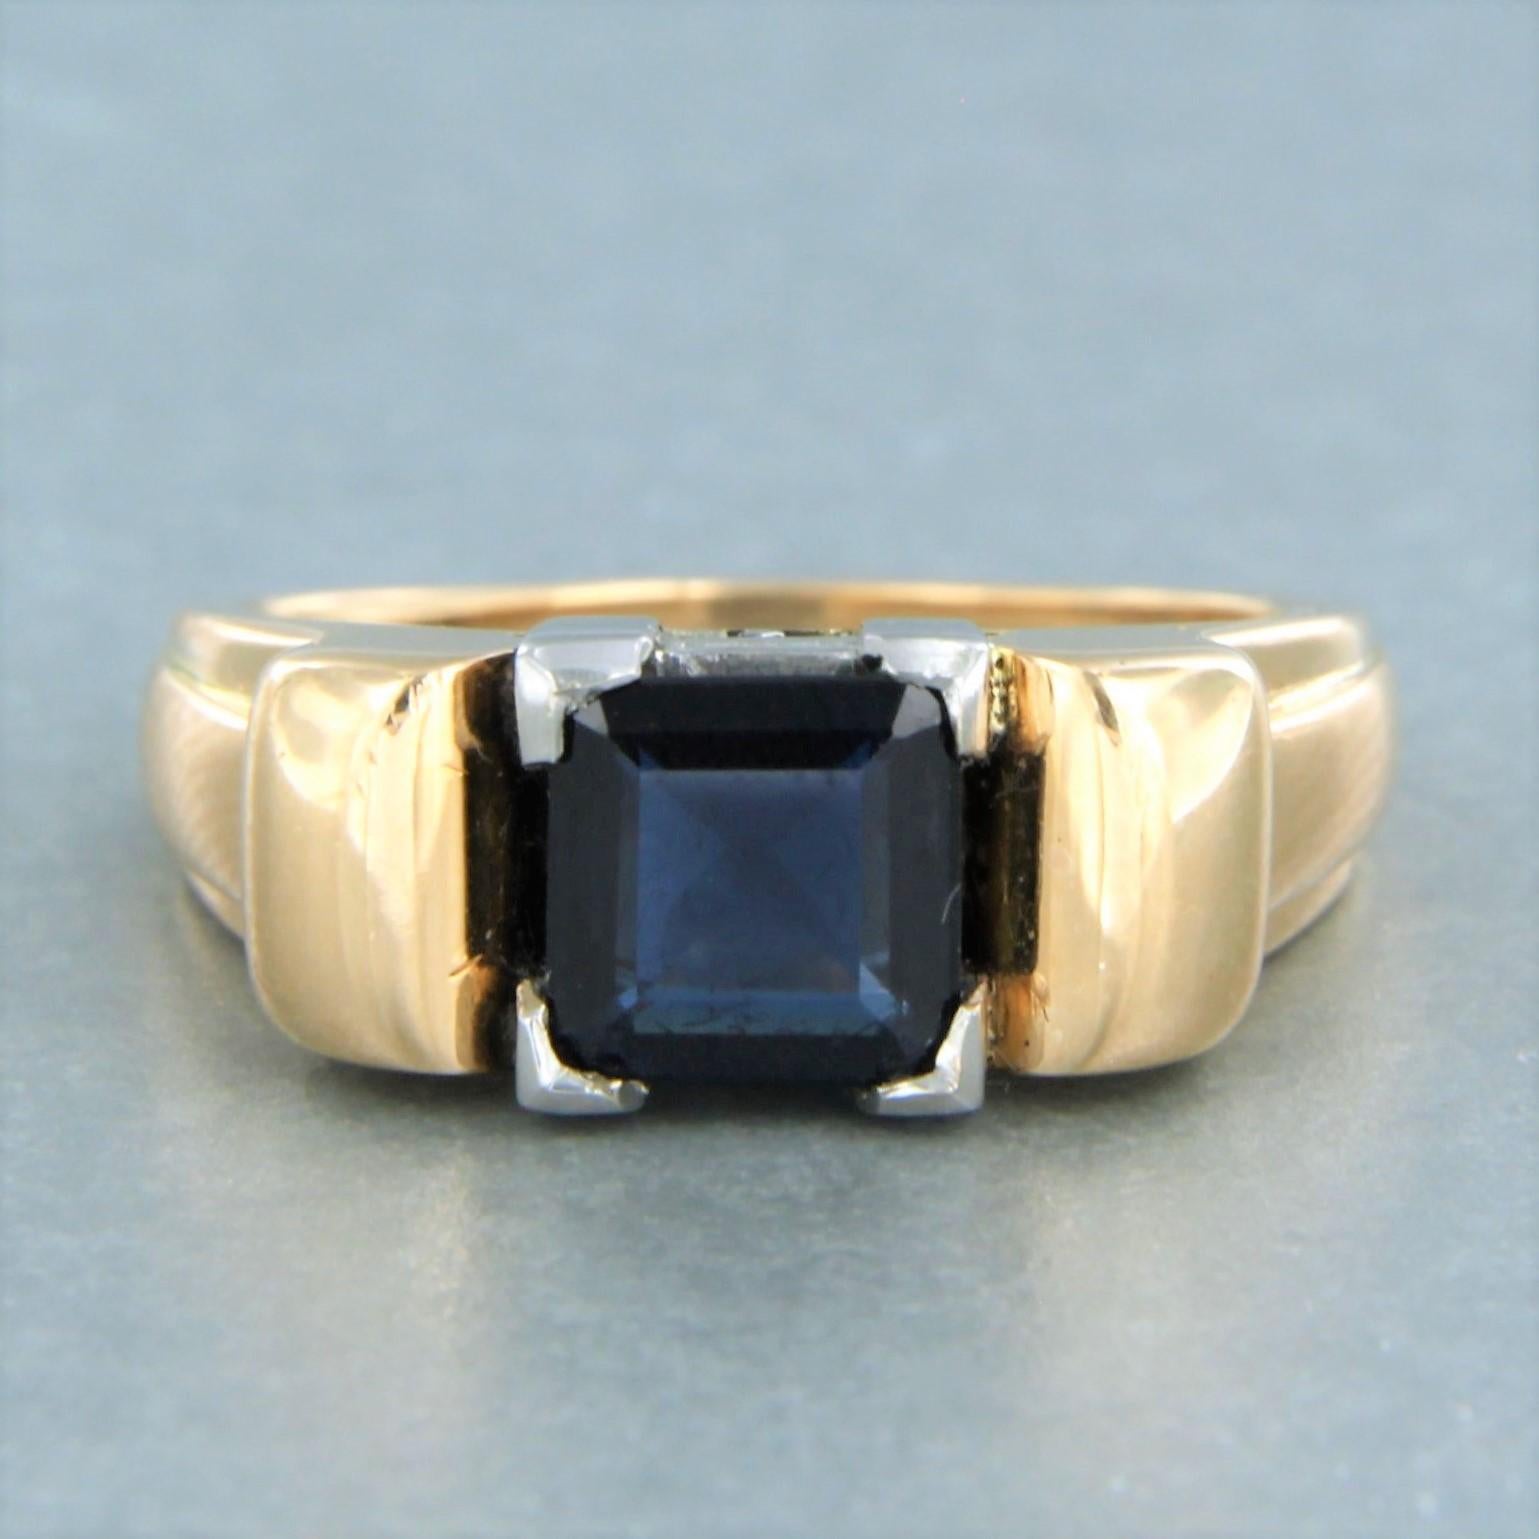 18k bicolor gold ring set with sapphire to. 1.50ct - ring size U.S. 7.25 - EU. 17.5(55)

detailed description:

the top of the ring is 8.0 mm wide and 6.1 mm high

Ring size U.S. 7.25 - EU. 17.5(55), ring can be enlarged or reduced a few sizes at